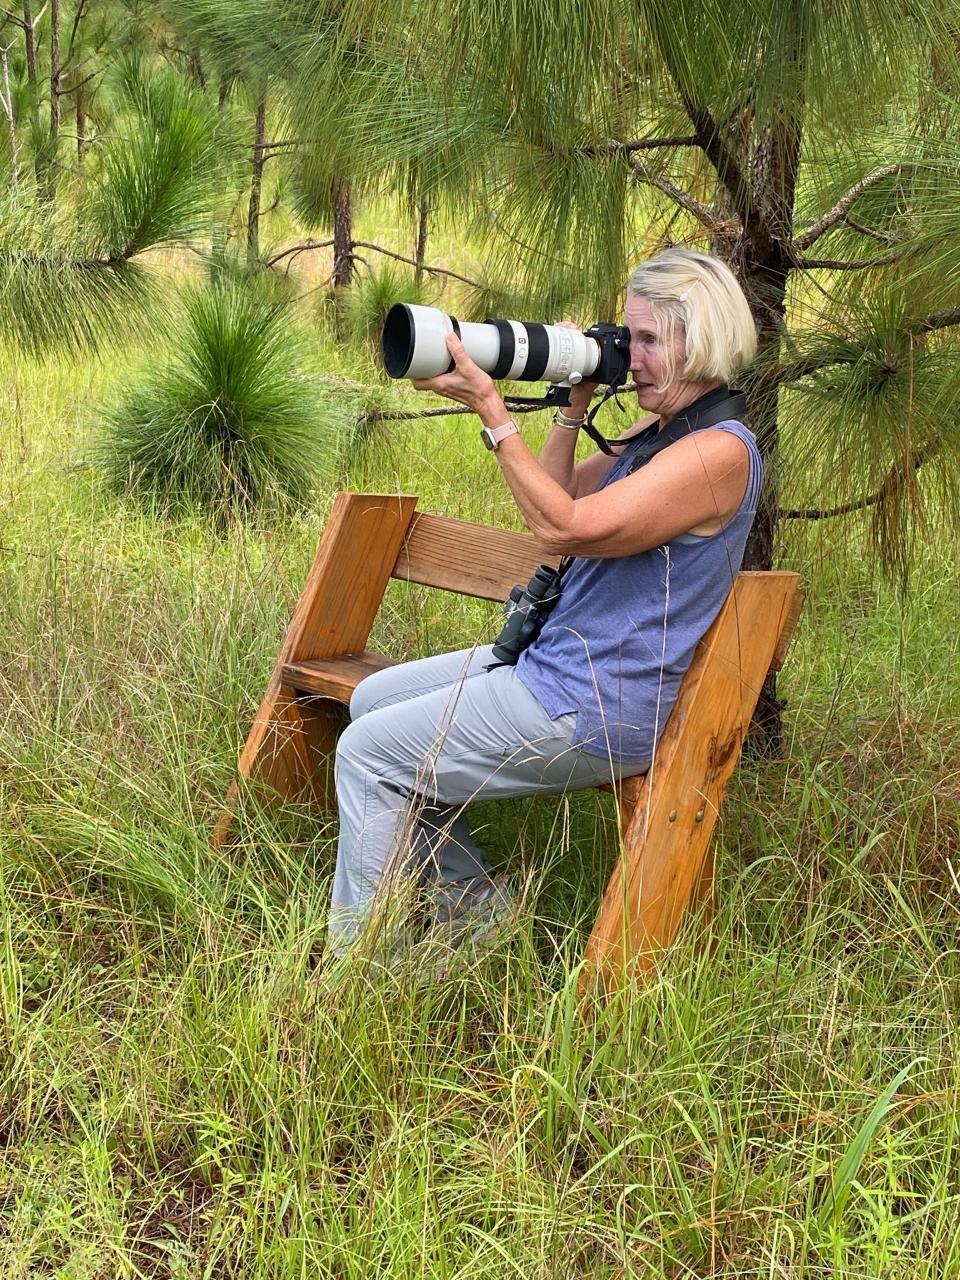 Wildlife photographer Alison Smith focuses on a butterfly in a longleaf pine forest while resting on a Leopold bench at Salleyland.